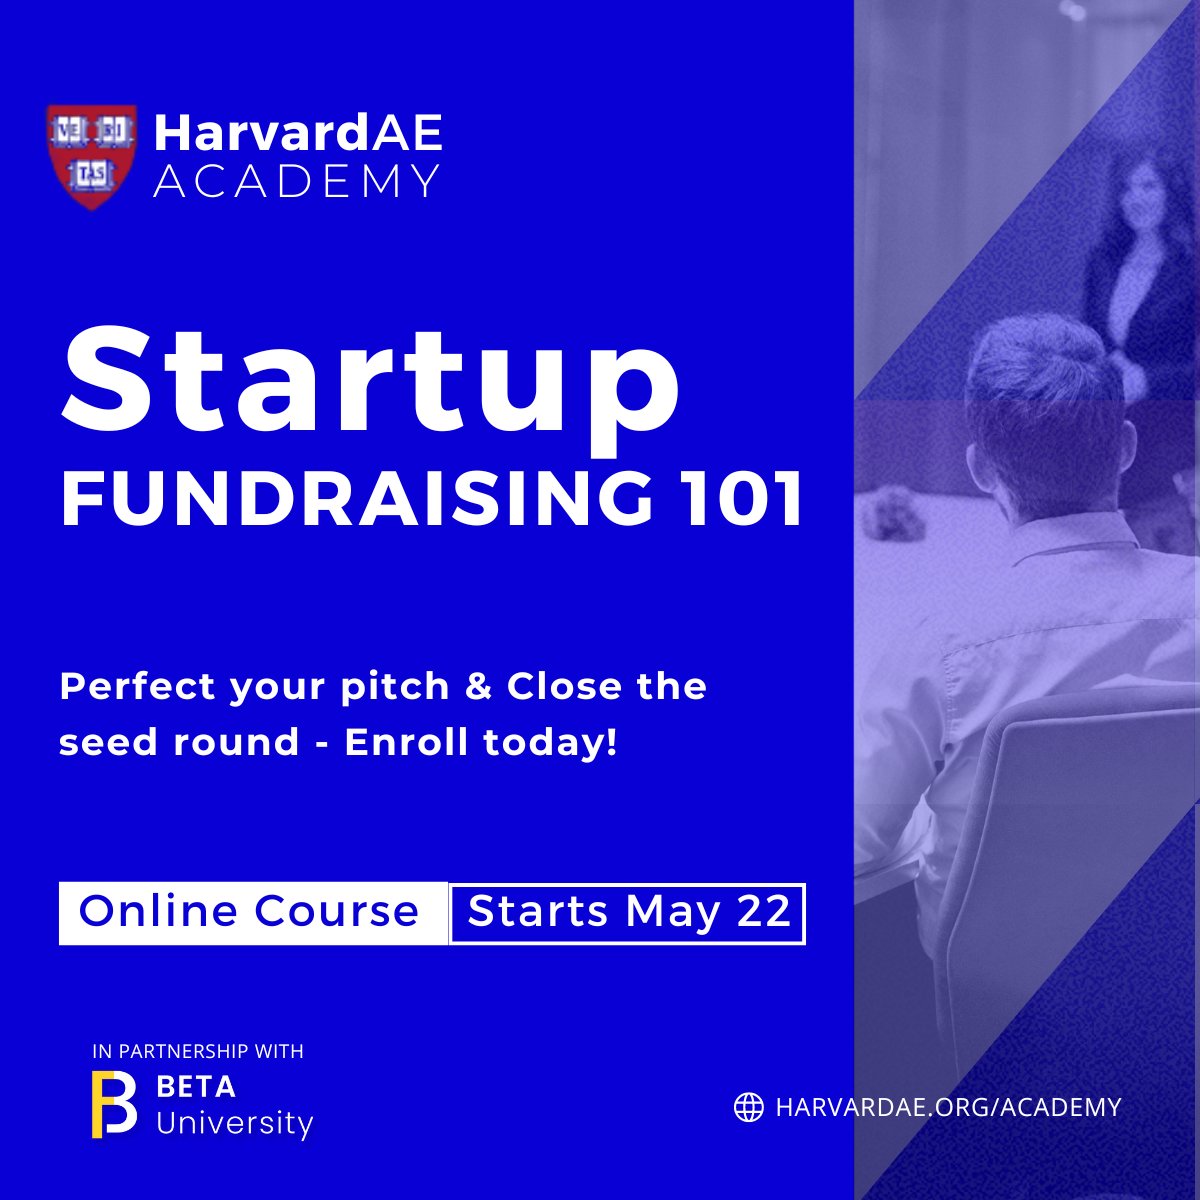 Unlock the secret to startup success!

Don’t just chase your dreams—pitch them effectively and watch them come to life!
harvardae.org/academy-course…

#Harvard #HAE #StartupFunding #SeedInvesting #VentureCapital #AngelInvestors #EarlyStageFunding #TechStartupFundraising